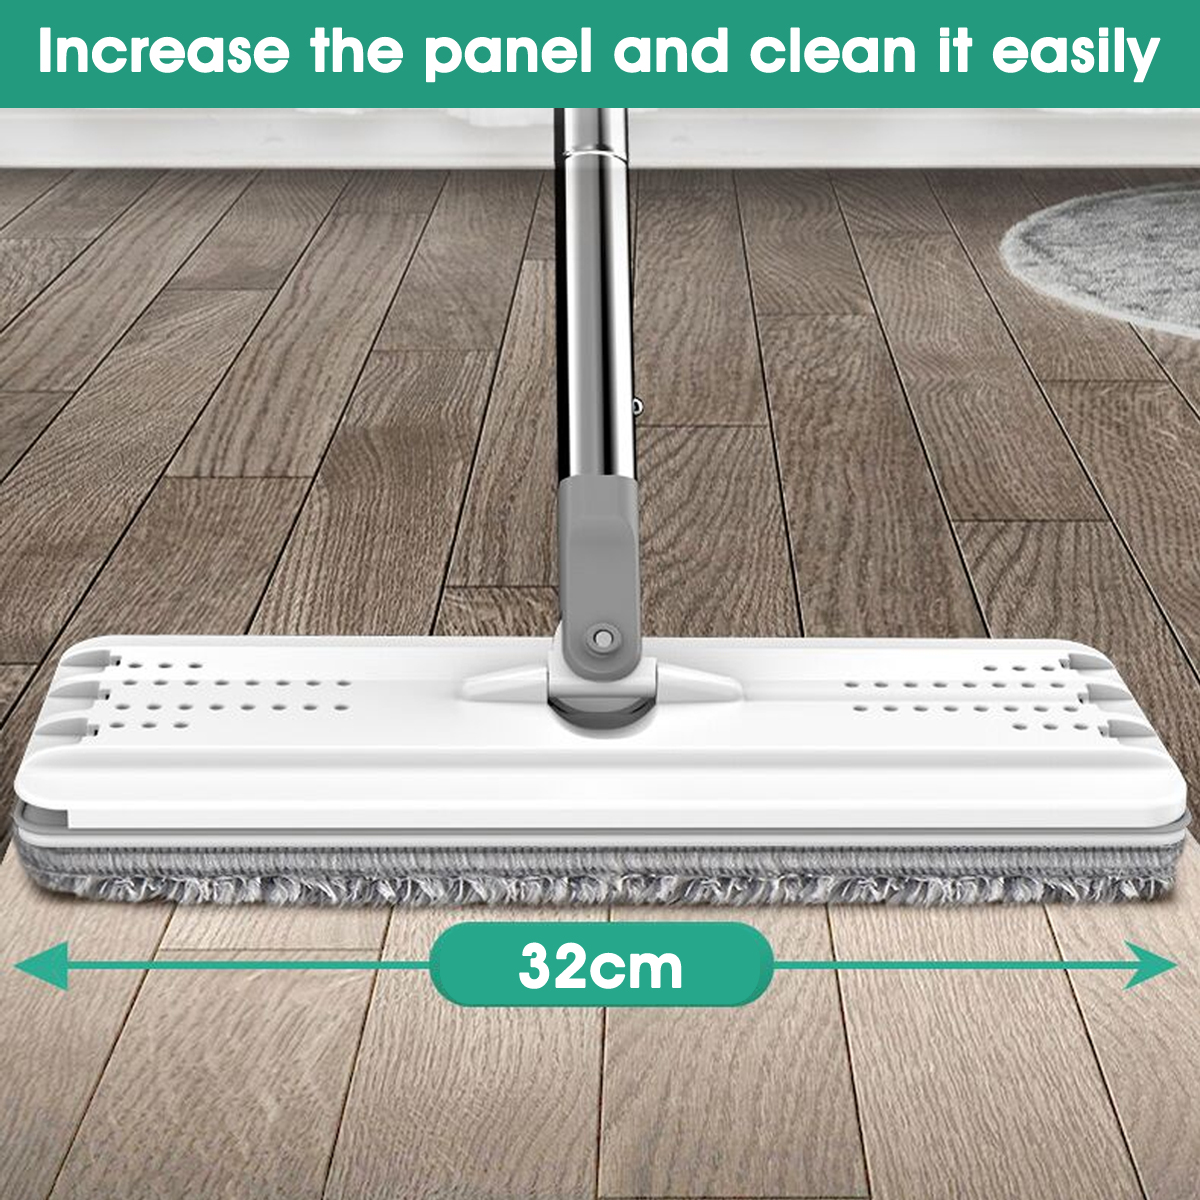 Dry-Wet-Automatic-Spin-Mop-Floor-Cleaner-Washing-Fiber-Hand-Cleaning-Dust-Fast-1588119